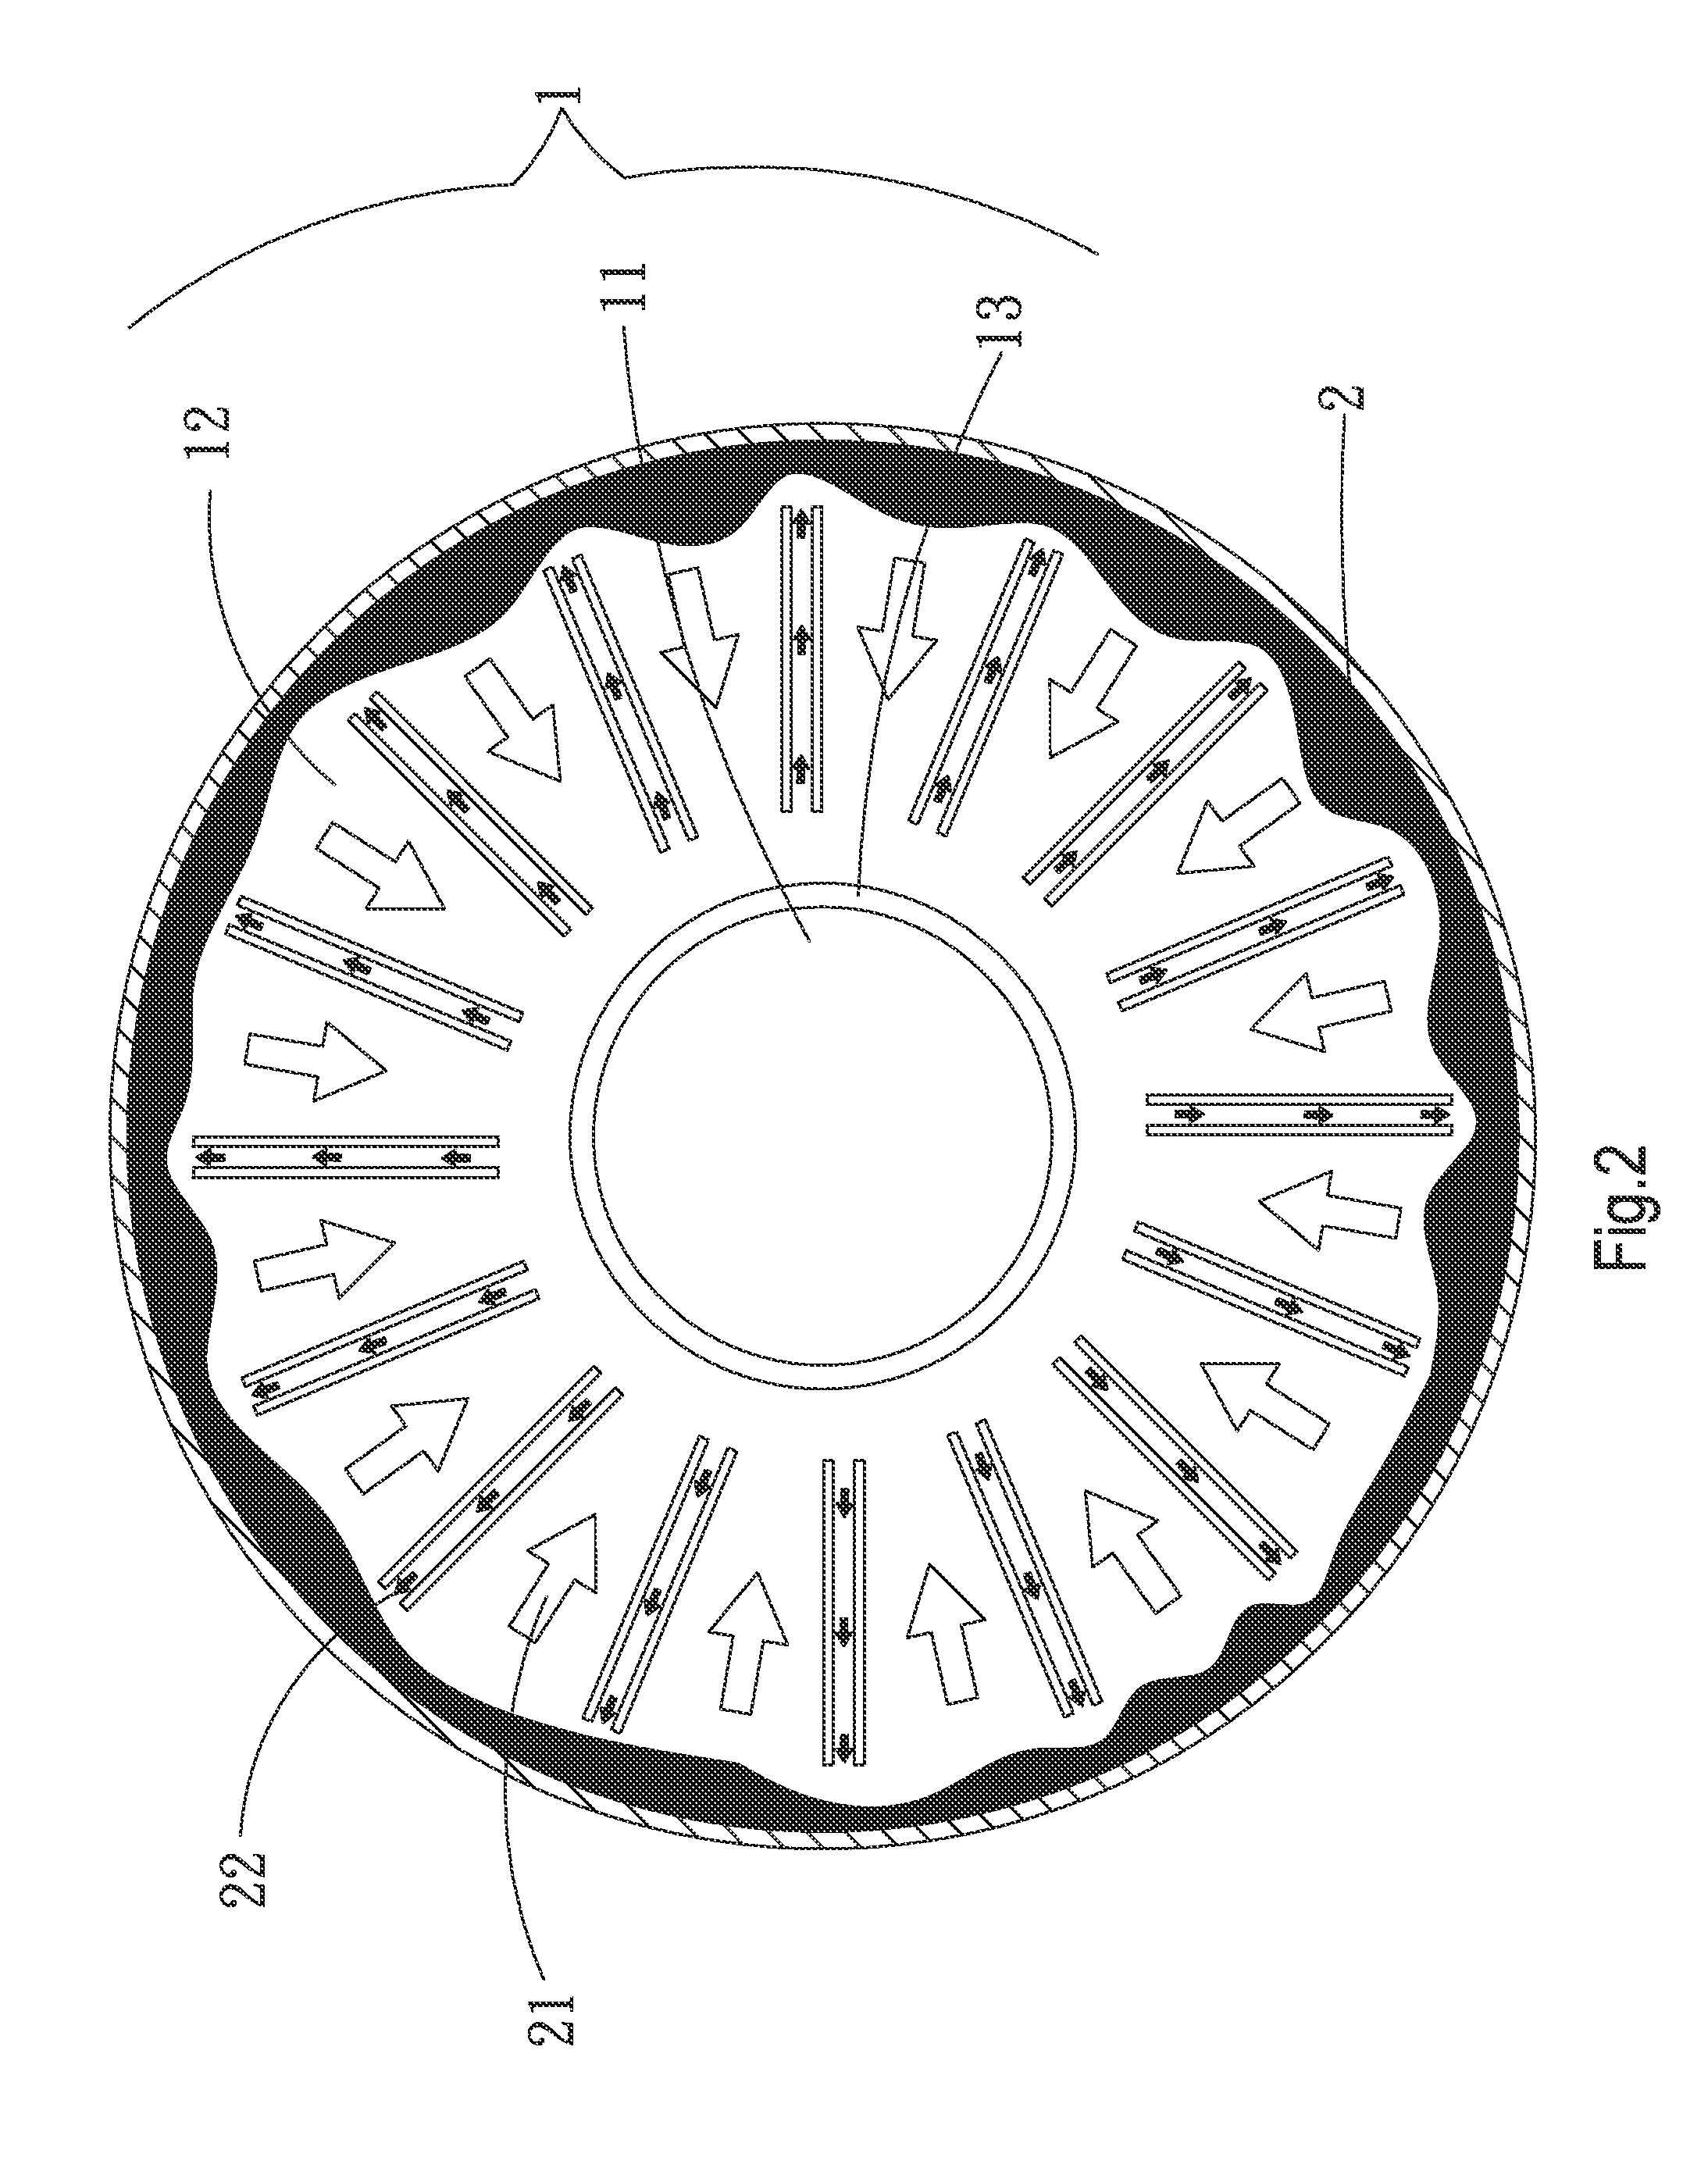 Centrifugal heat dissipation device and motor using same